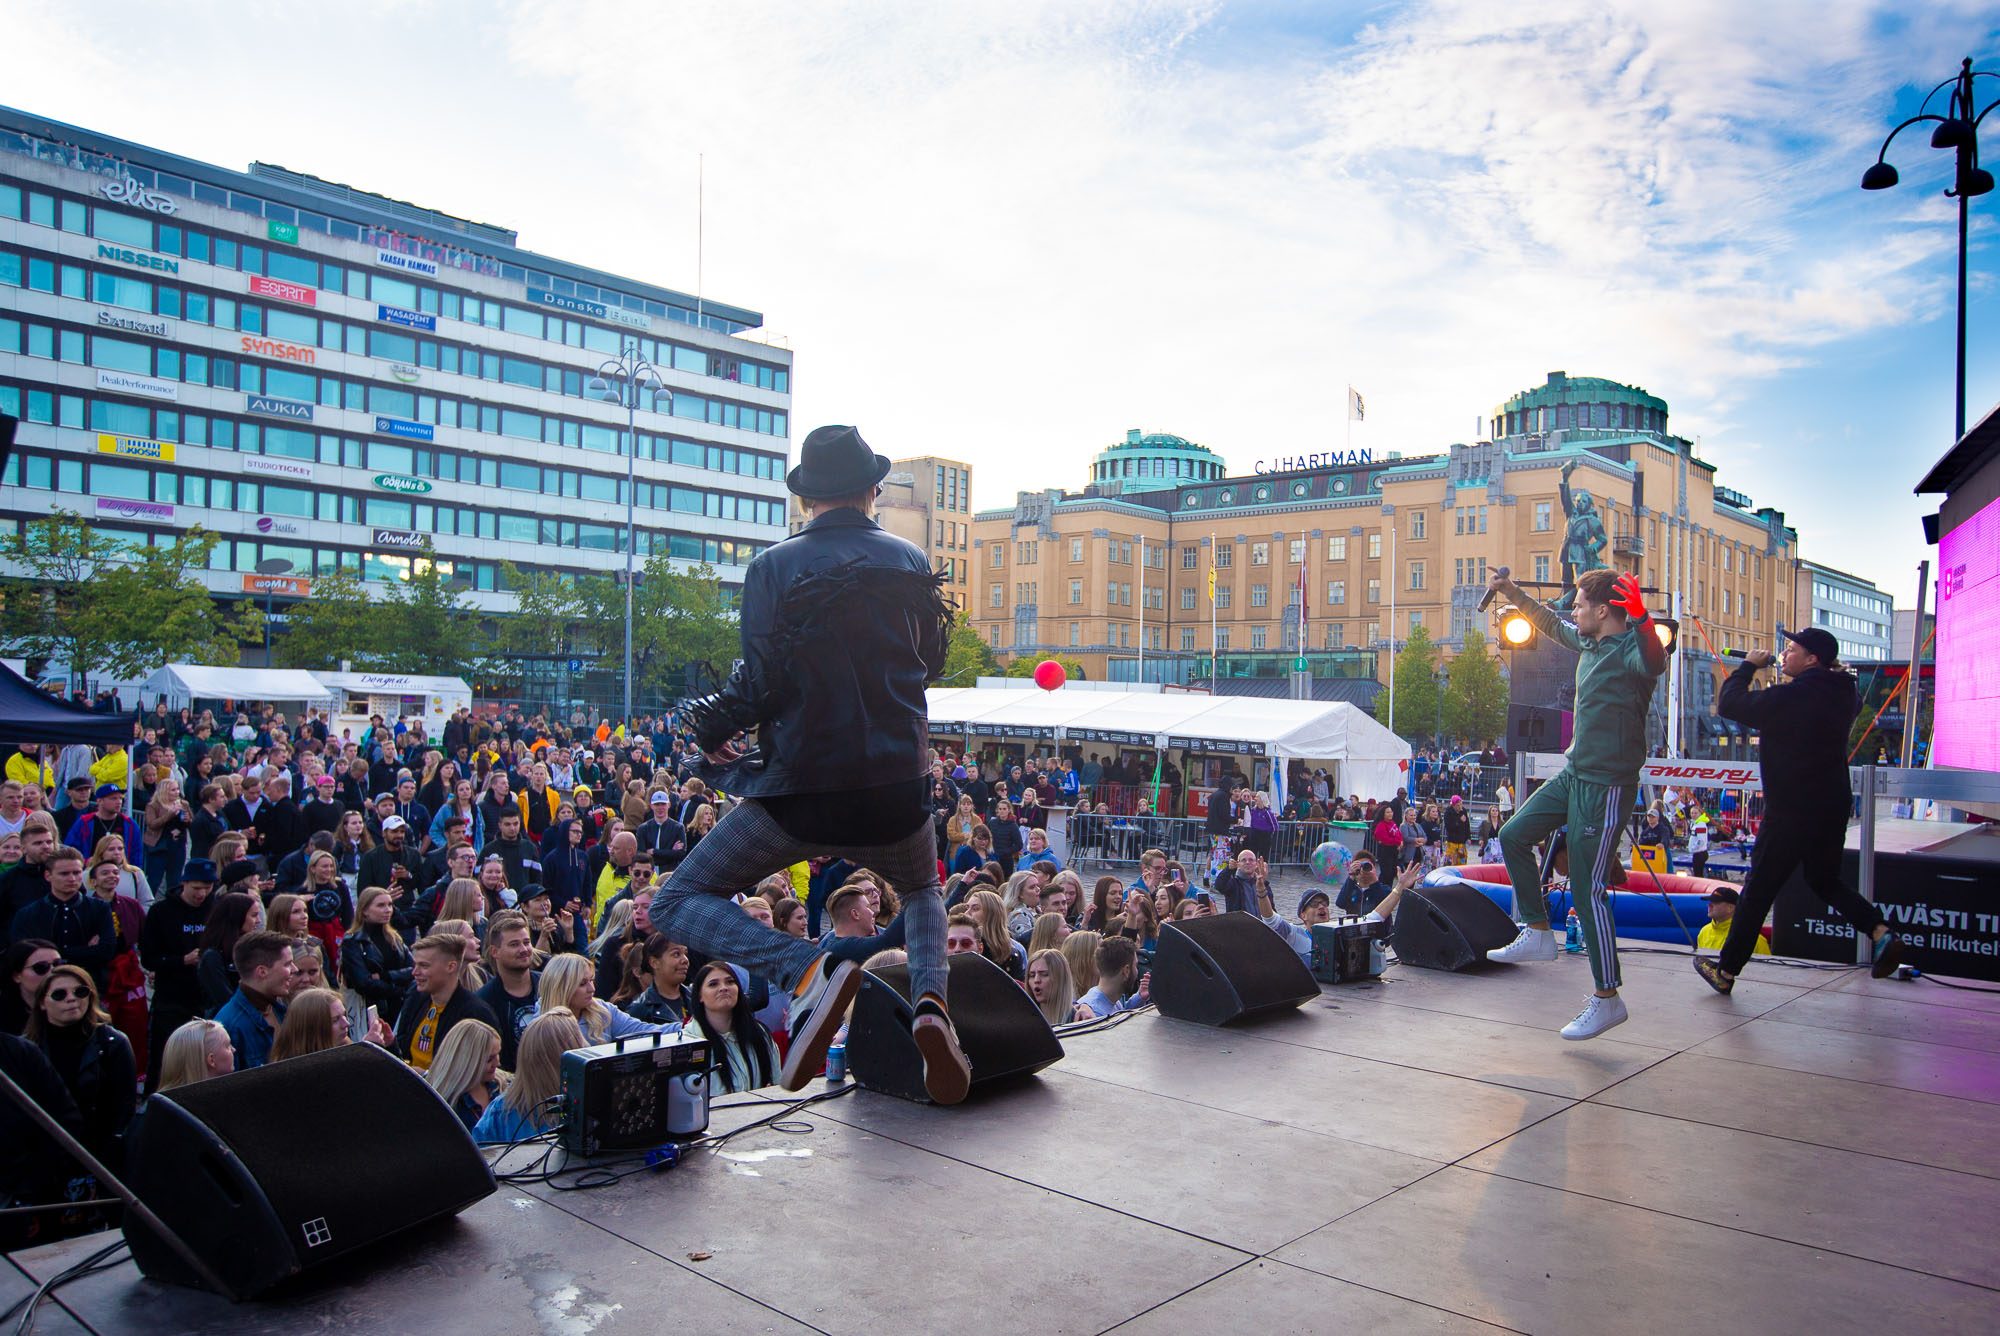 Vaasa Campus Festival kicks off in celebration of the new academic year